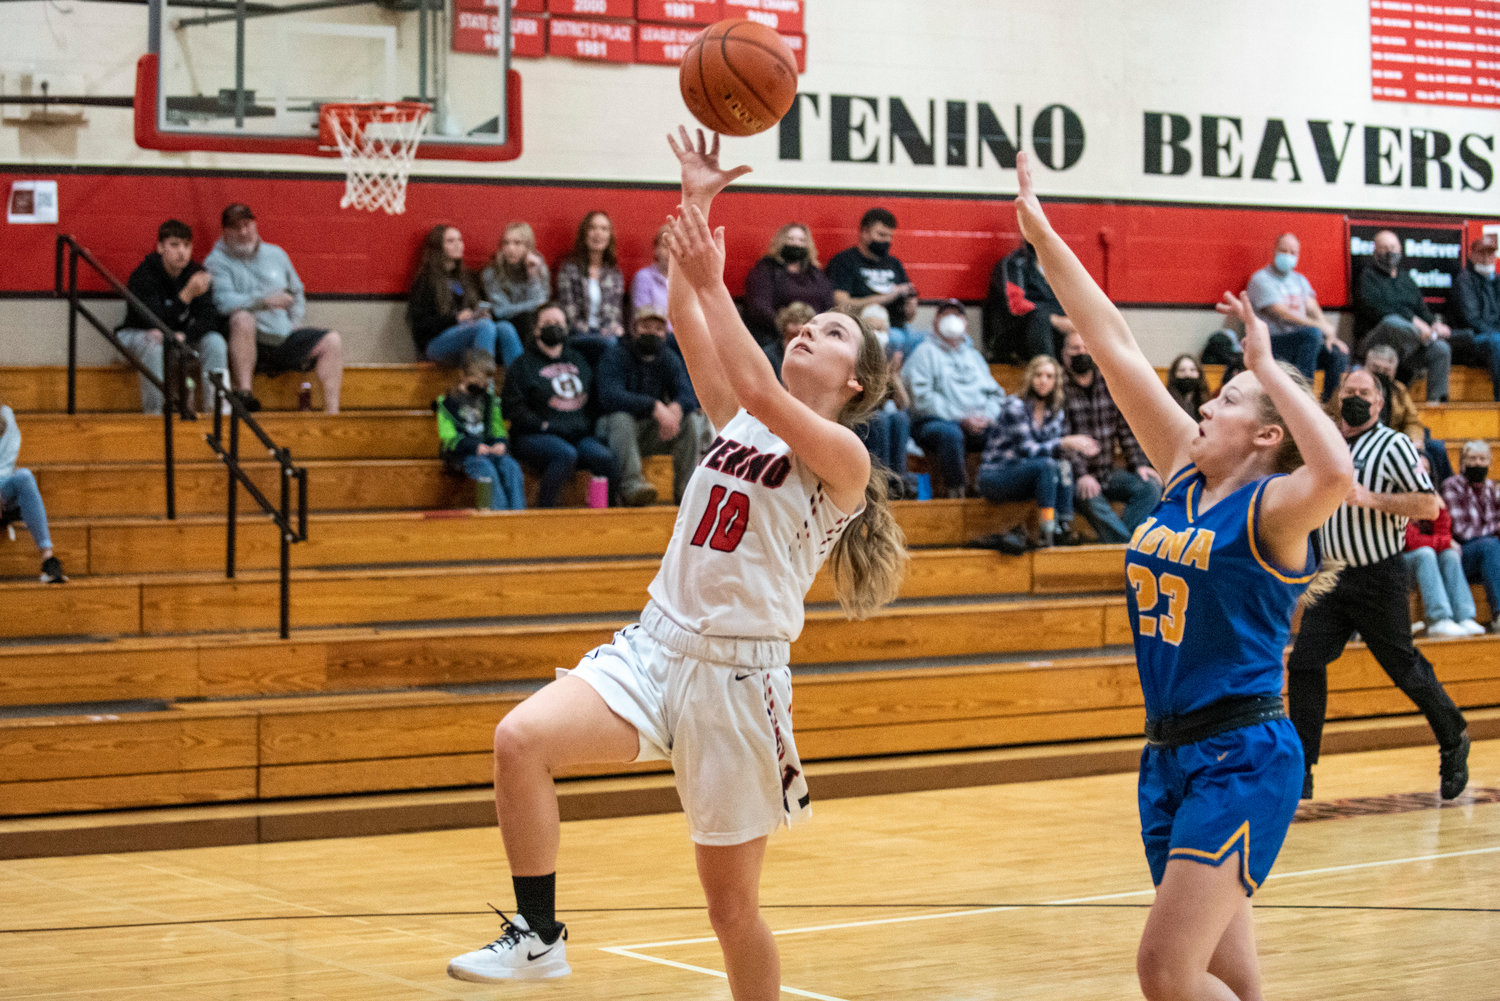 Tenino's Grace Vestal (10) throws up a layin against Adna's Kendall Humphrey (23) on Dec. 14.